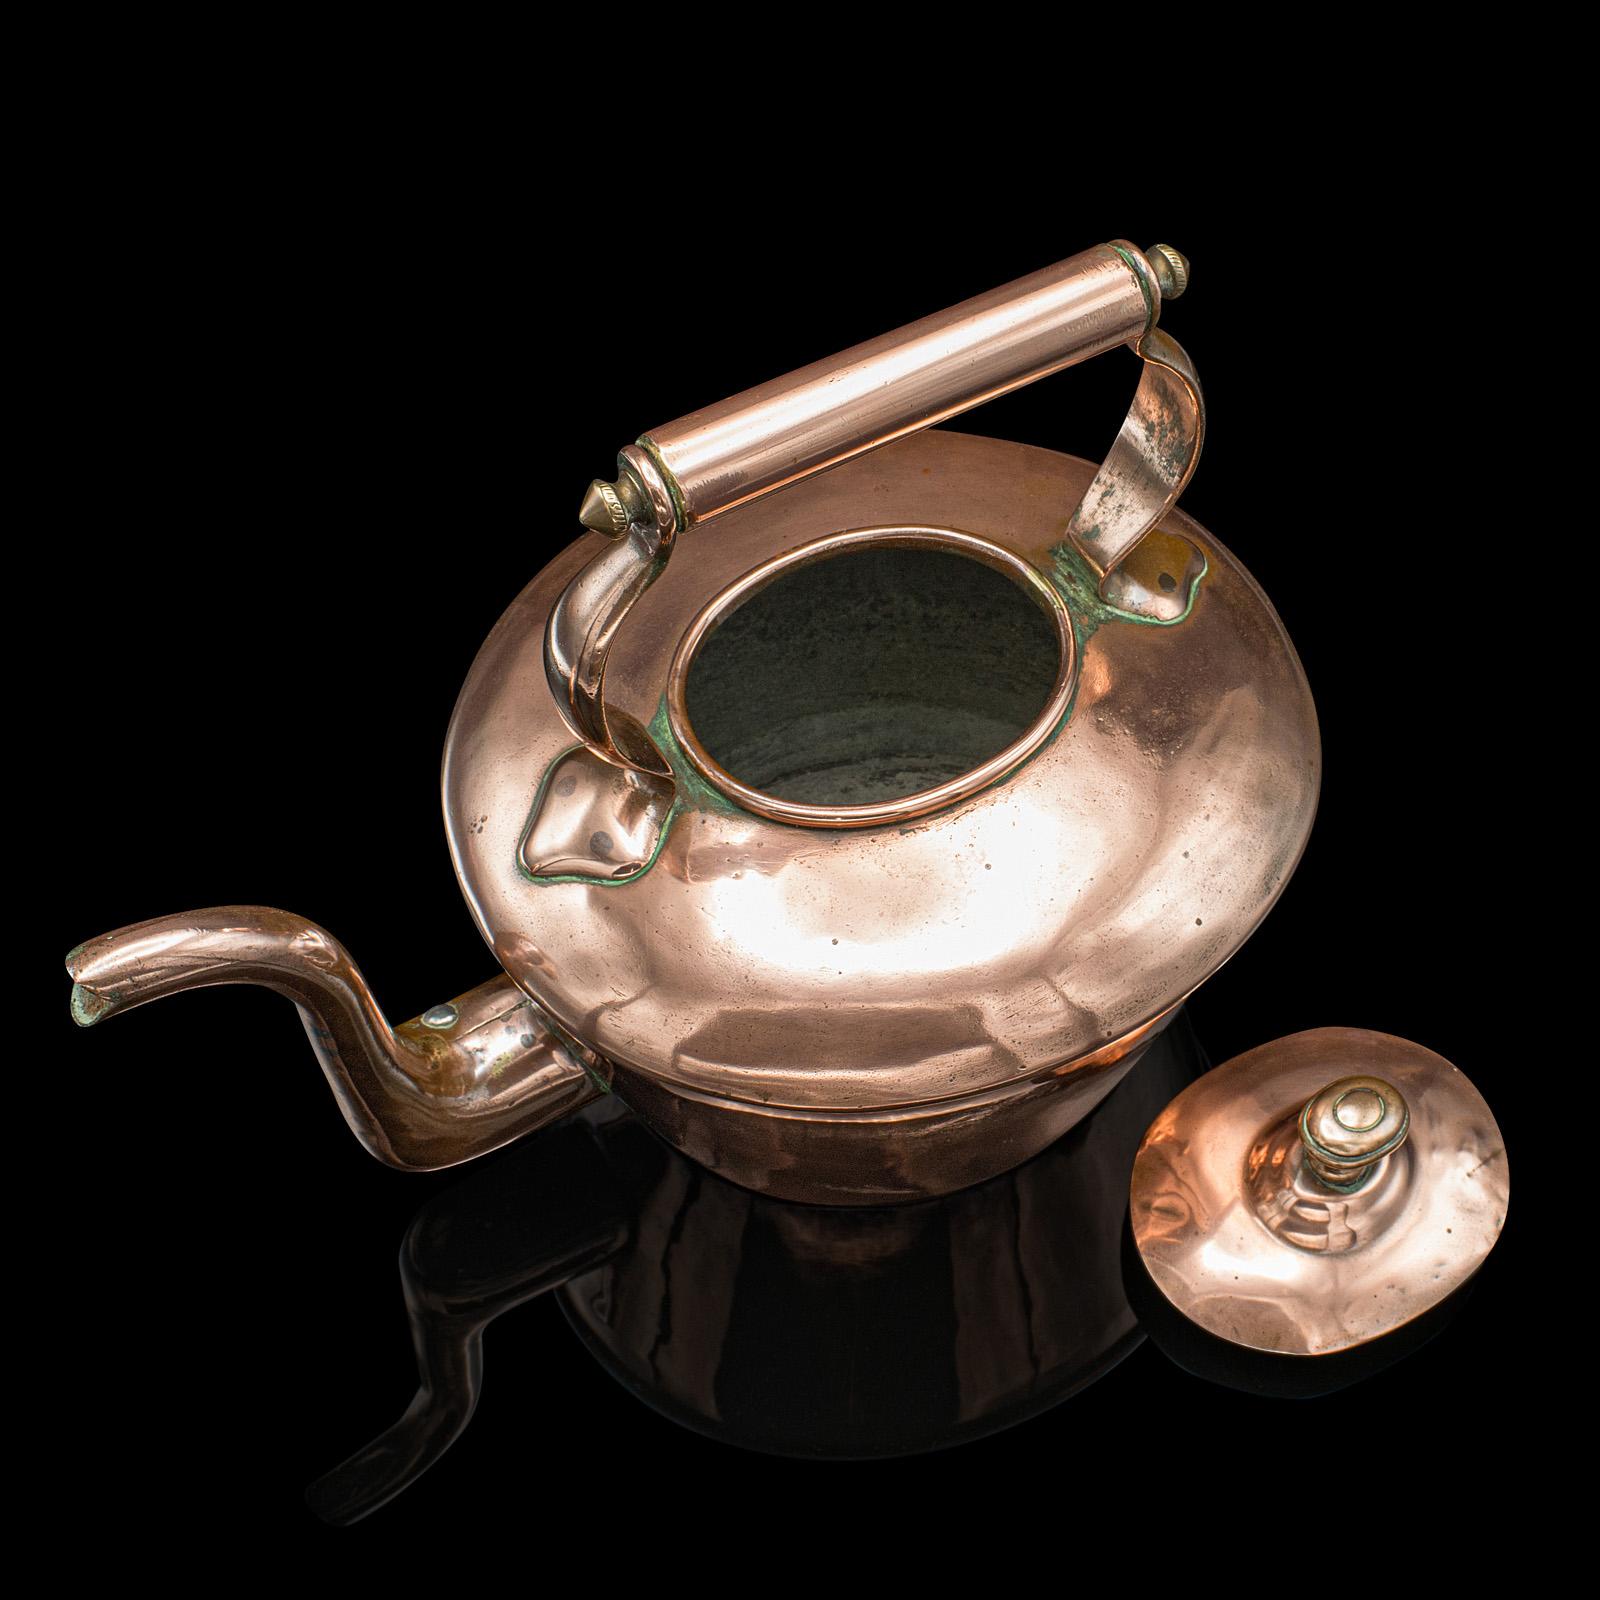 Antique Scullery Kettle, English, Copper, Stovetop Teapot, Victorian, Circa 1870 For Sale 2